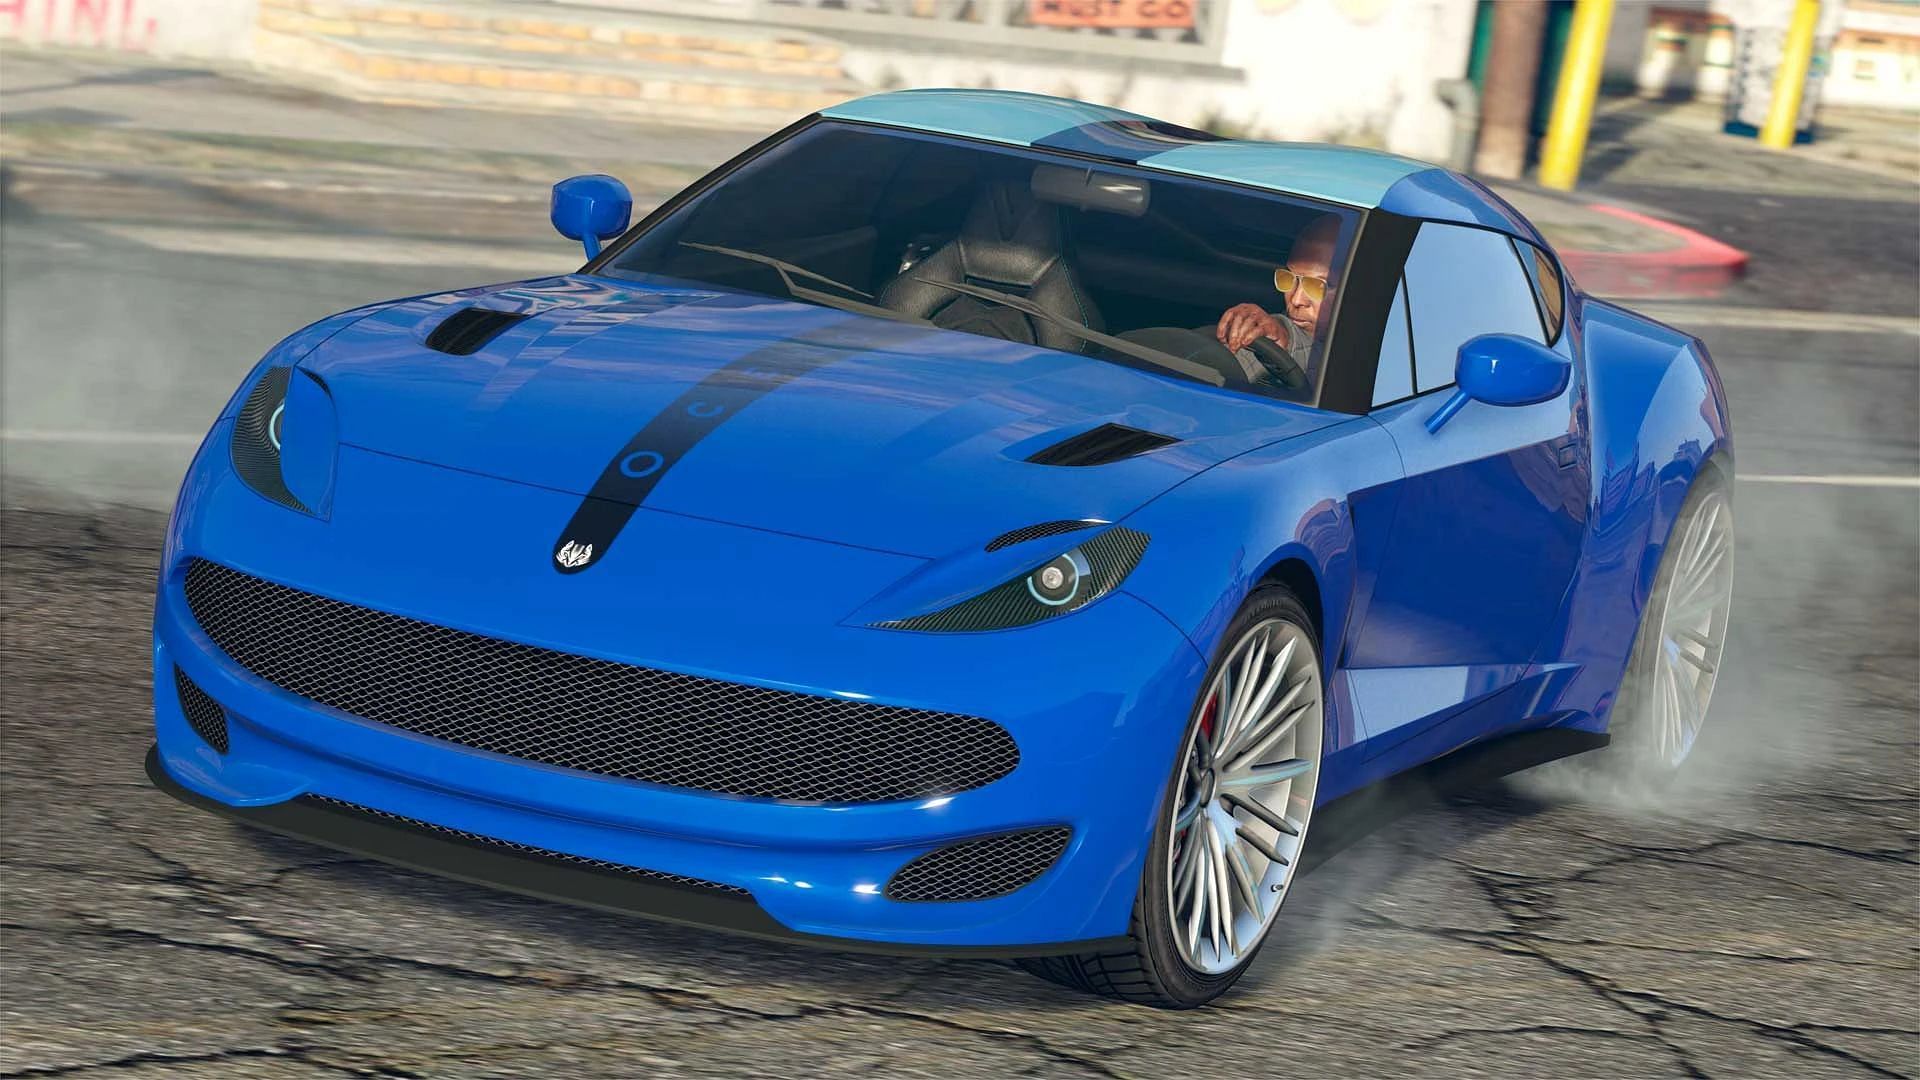 The Pariah is still the fastest car without any boosts or HSW mods (Image via Rockstar Games)